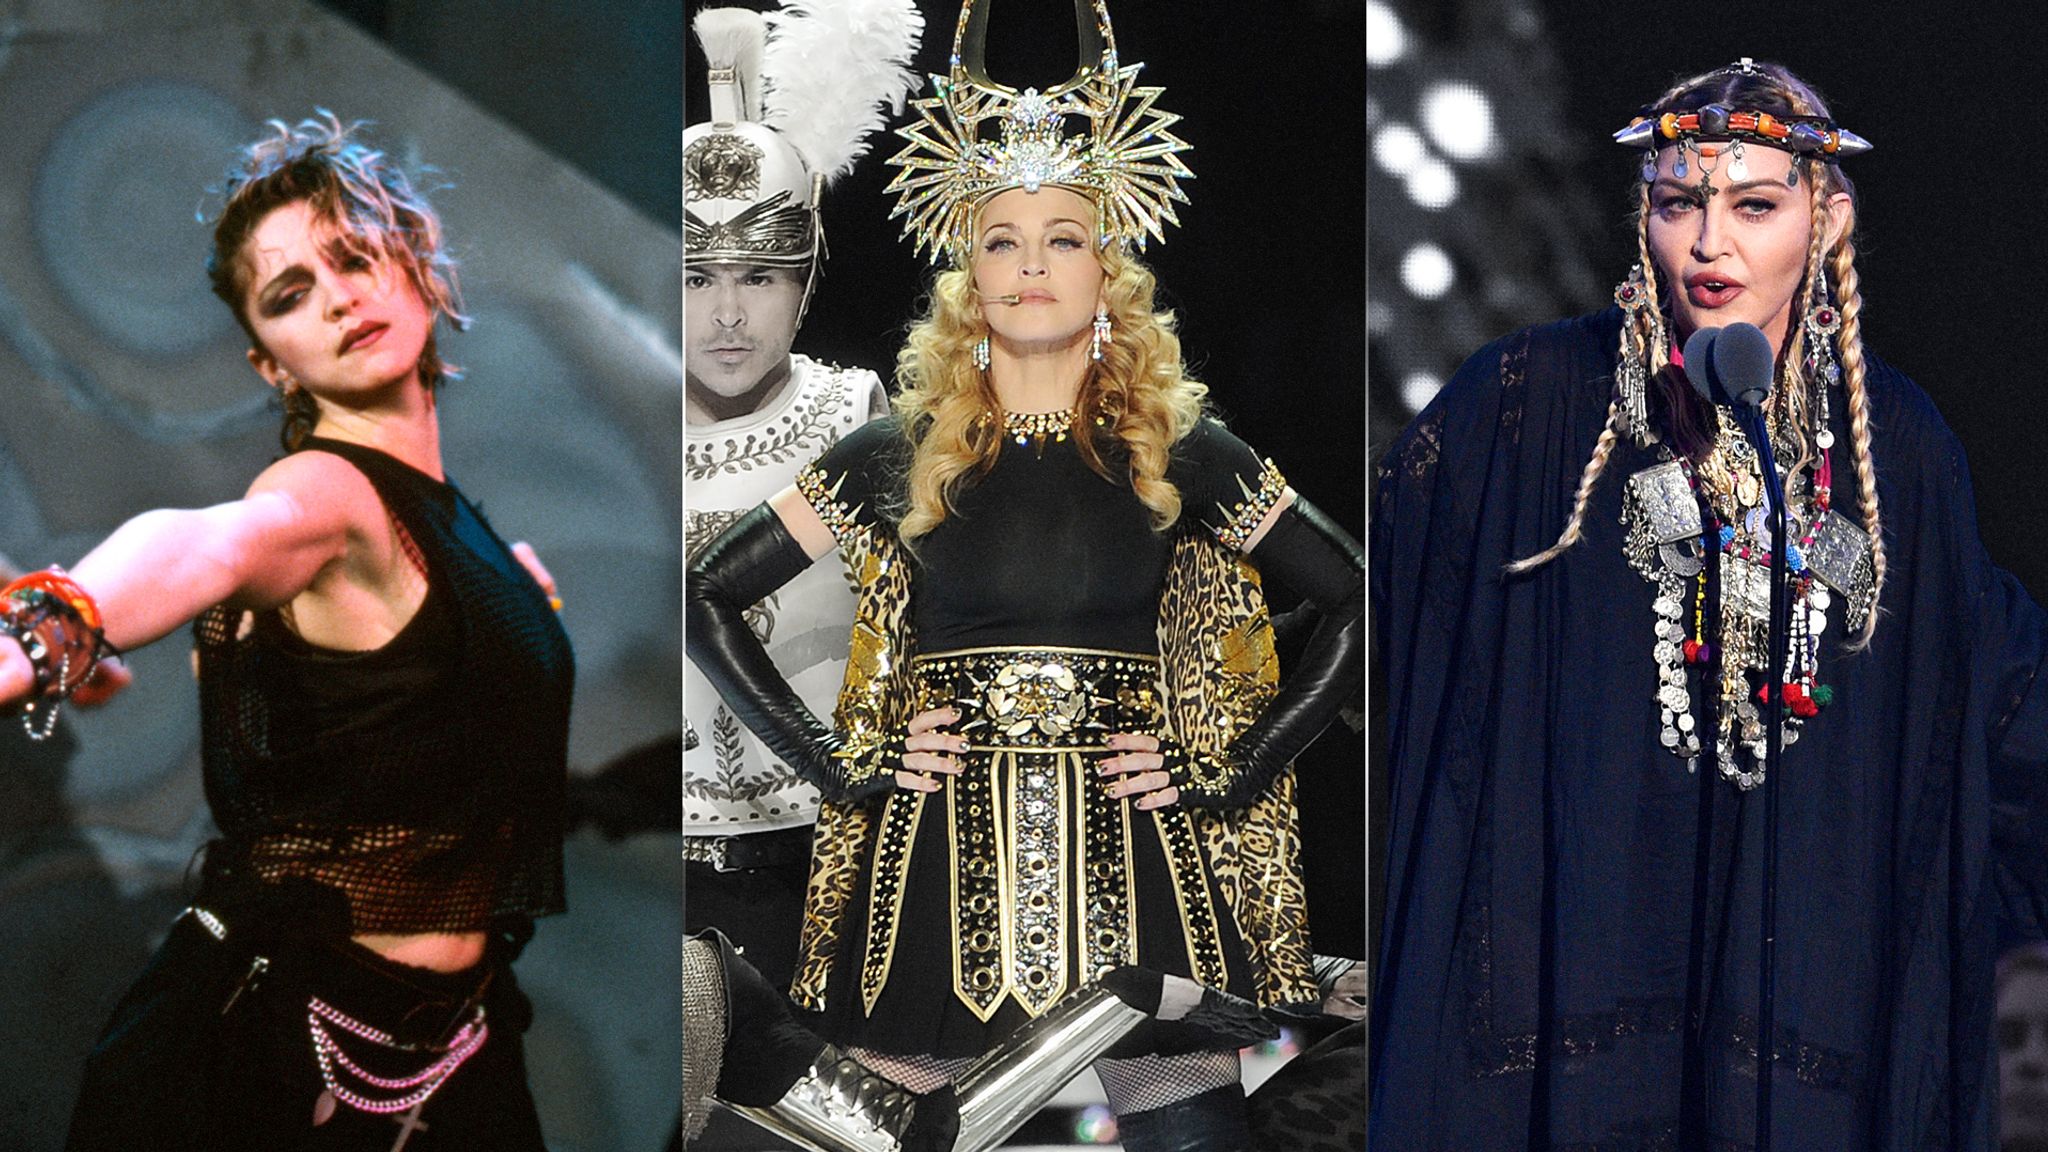 Shes Crowned Queen Of The Cocks - Madonna: Warrior, genius and icon - how the Queen Of Pop defined an era and  set the bar for female stars | Ents & Arts News | Sky News